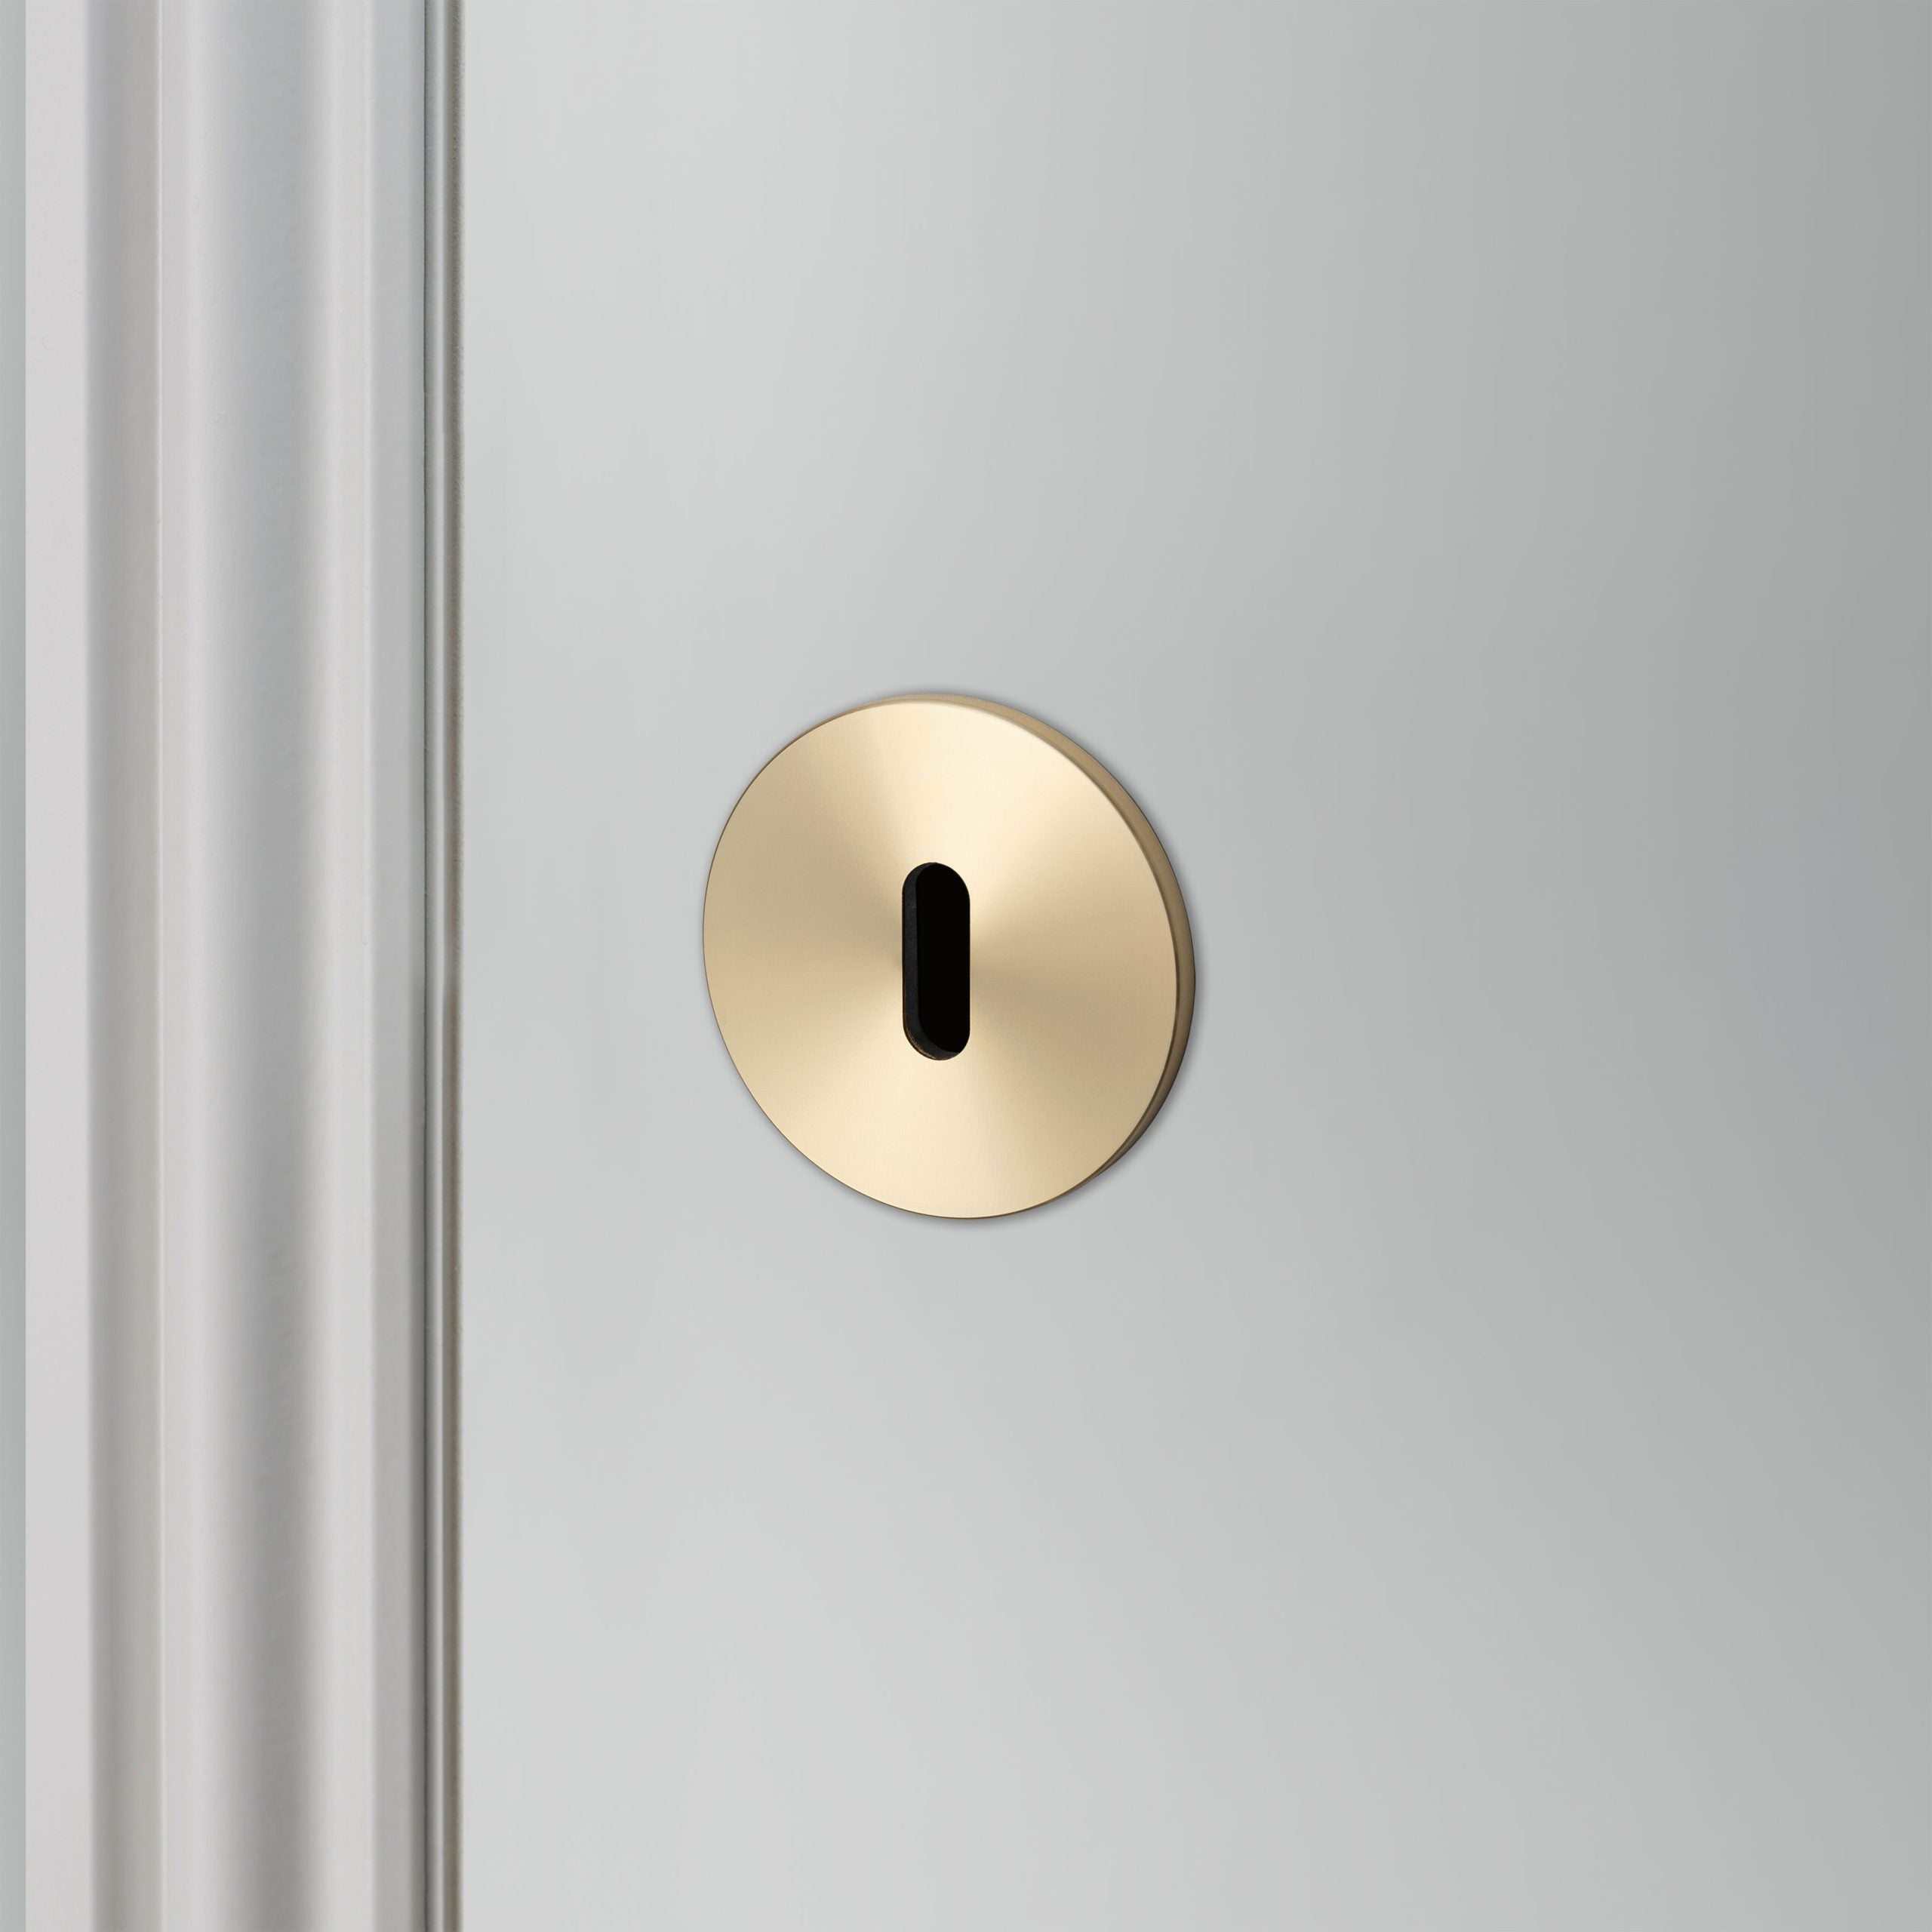 Key Escutcheon Plate | By Buster + Punch